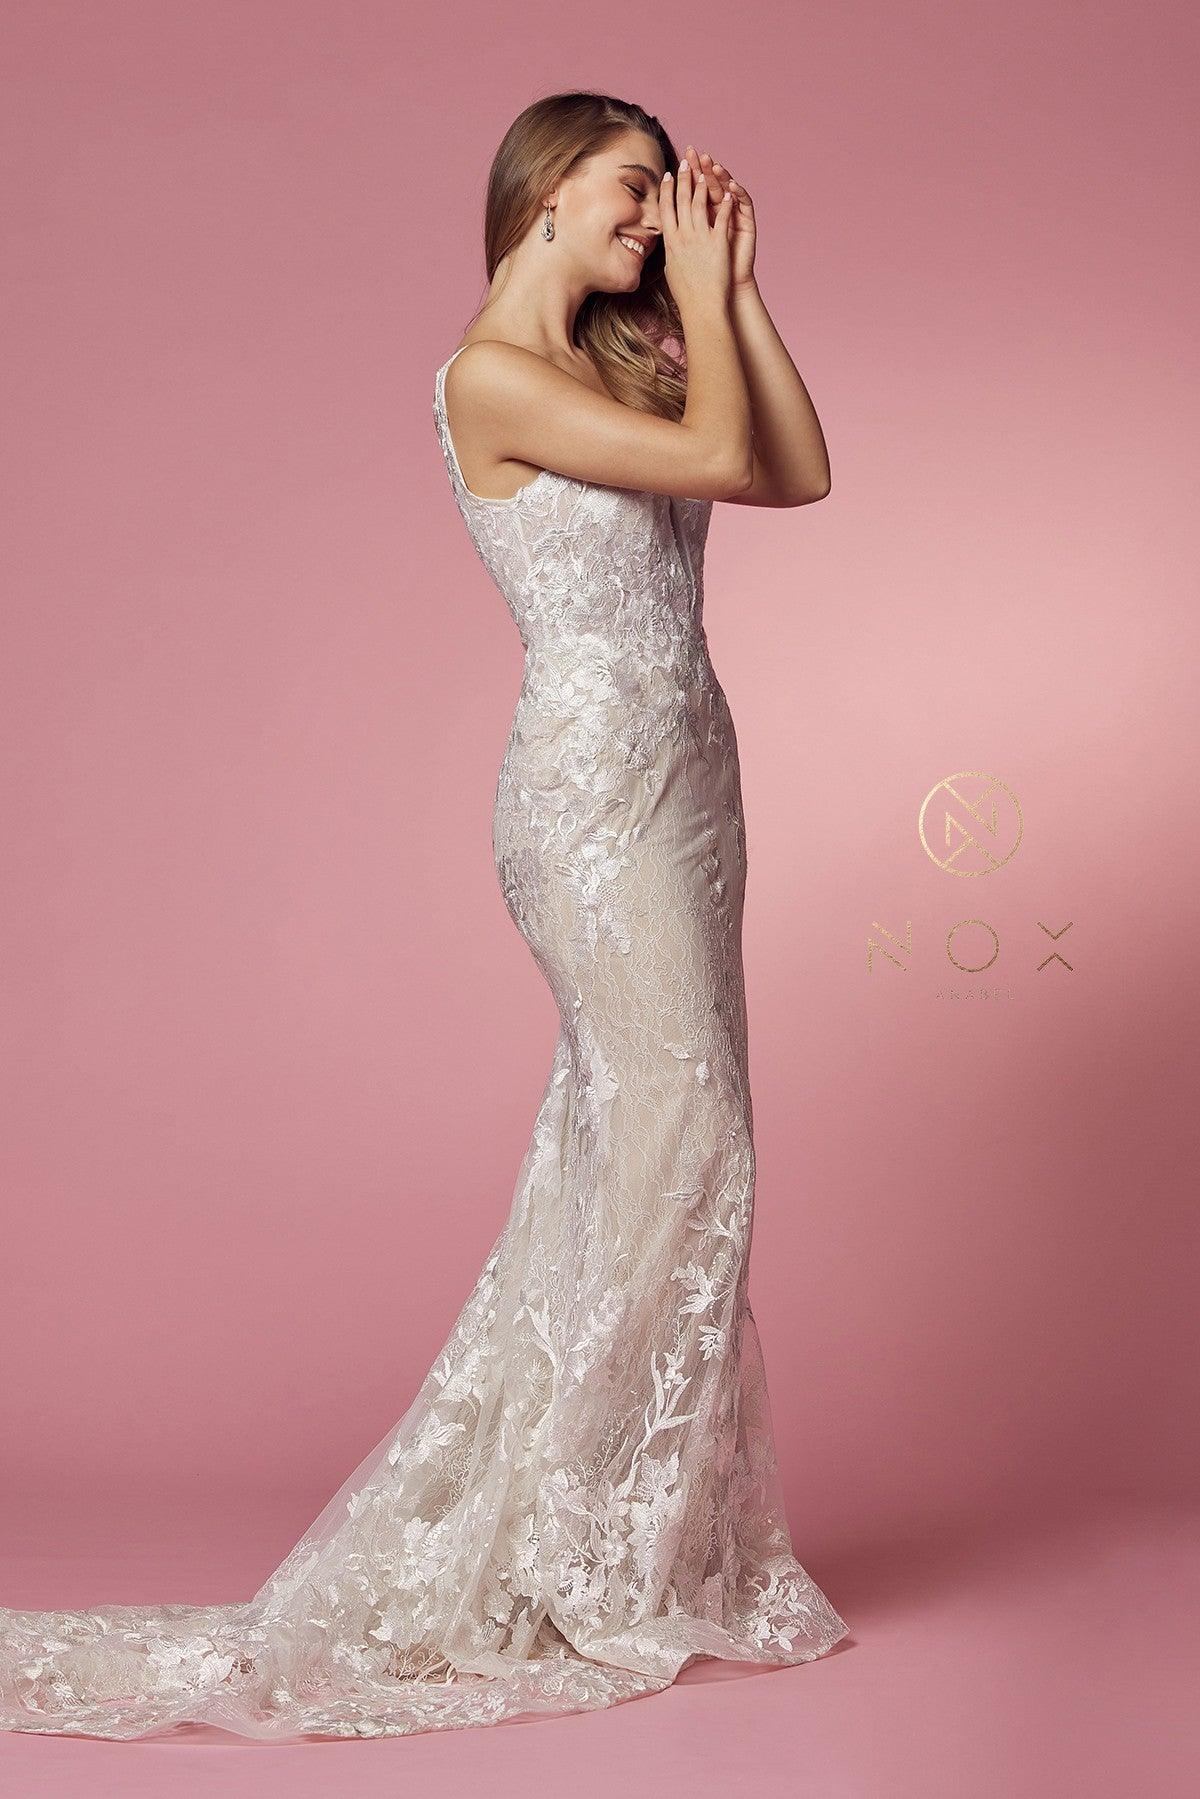 Sleeveless Formal Long Wedding Gown - The Dress Outlet